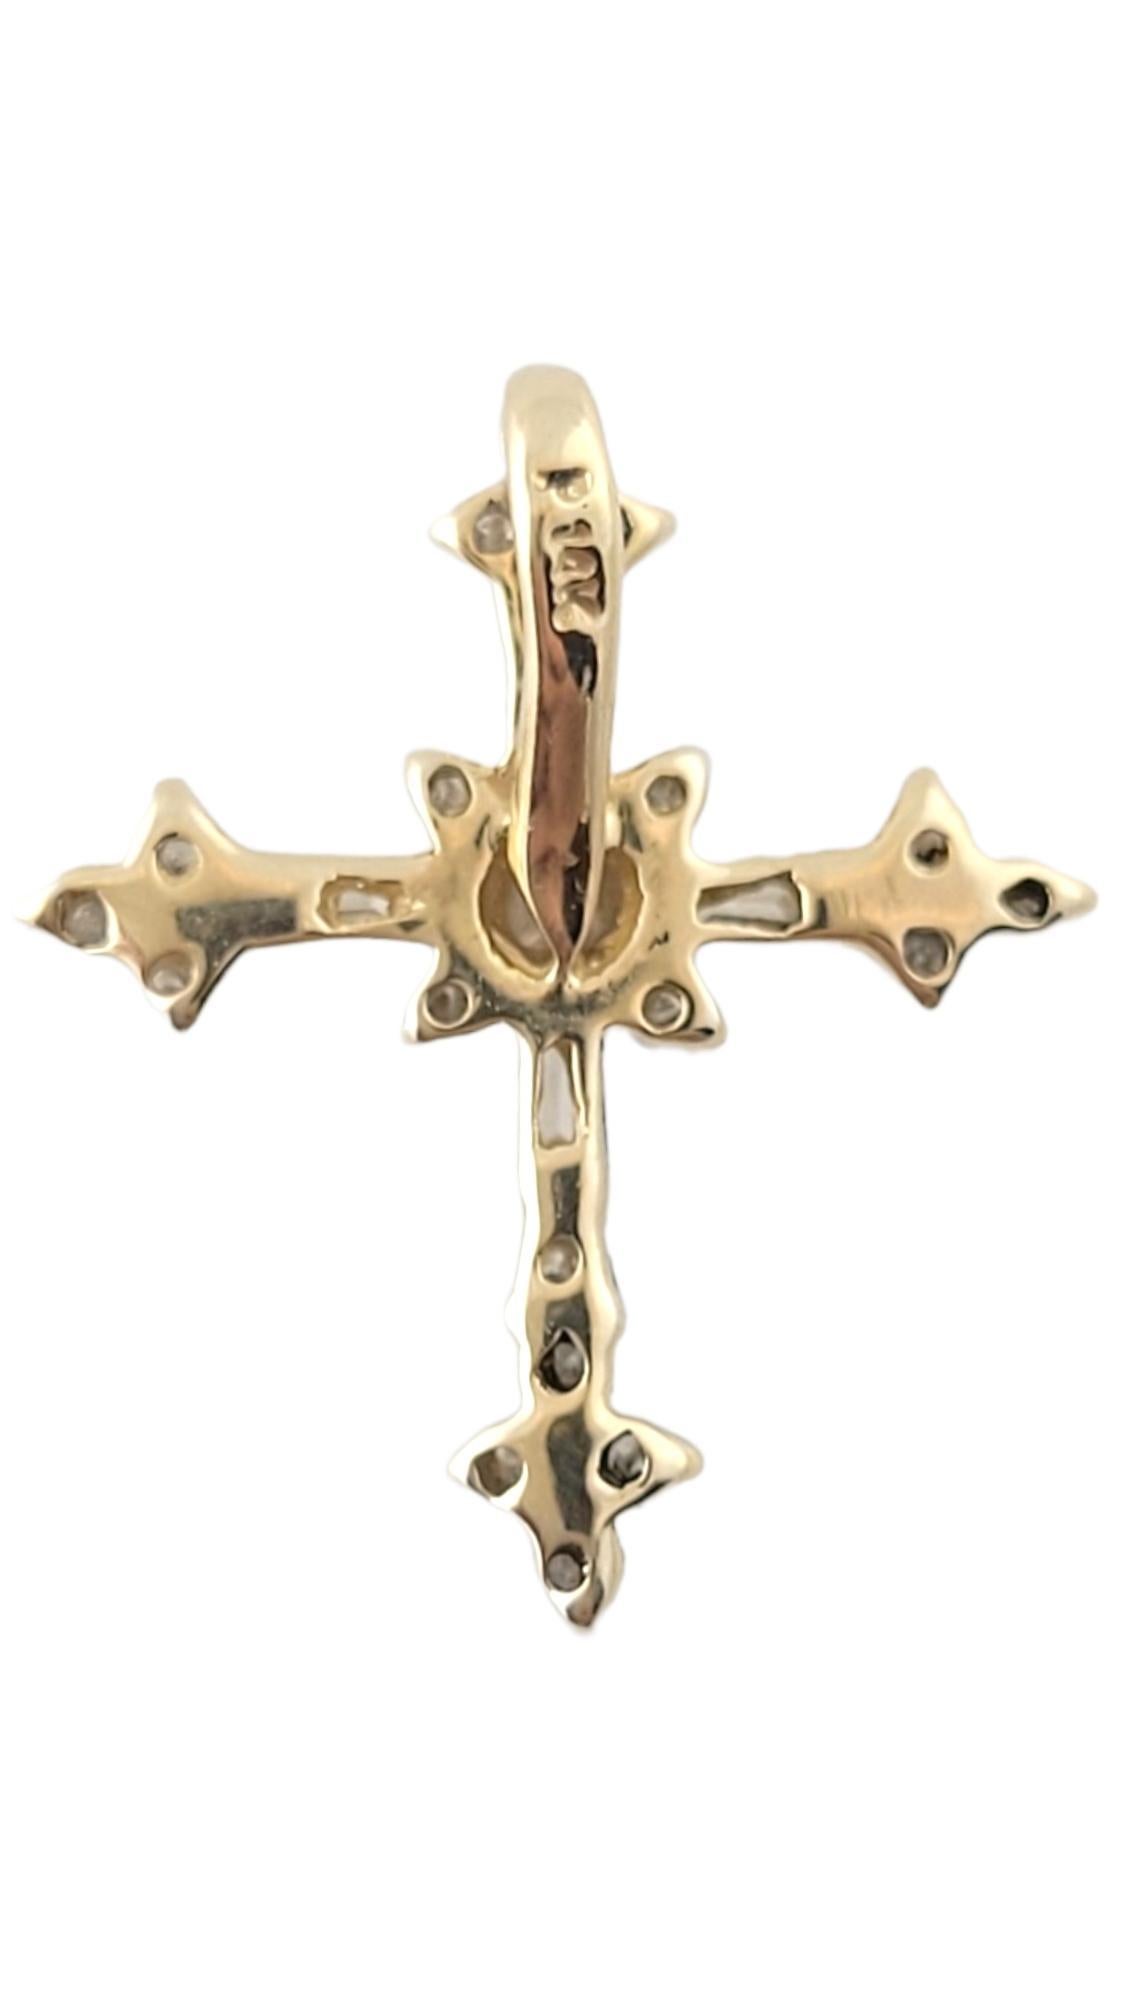 Vintage 14K Yellow Gold Diamond Cross Pendant

This stunning cross pendant is crafted from 14K yellow gold and features 14 found brilliant cut diamonds and 4 baguette cut diamonds for a beautiful sparkle!

Approximate total diamond weight: .13